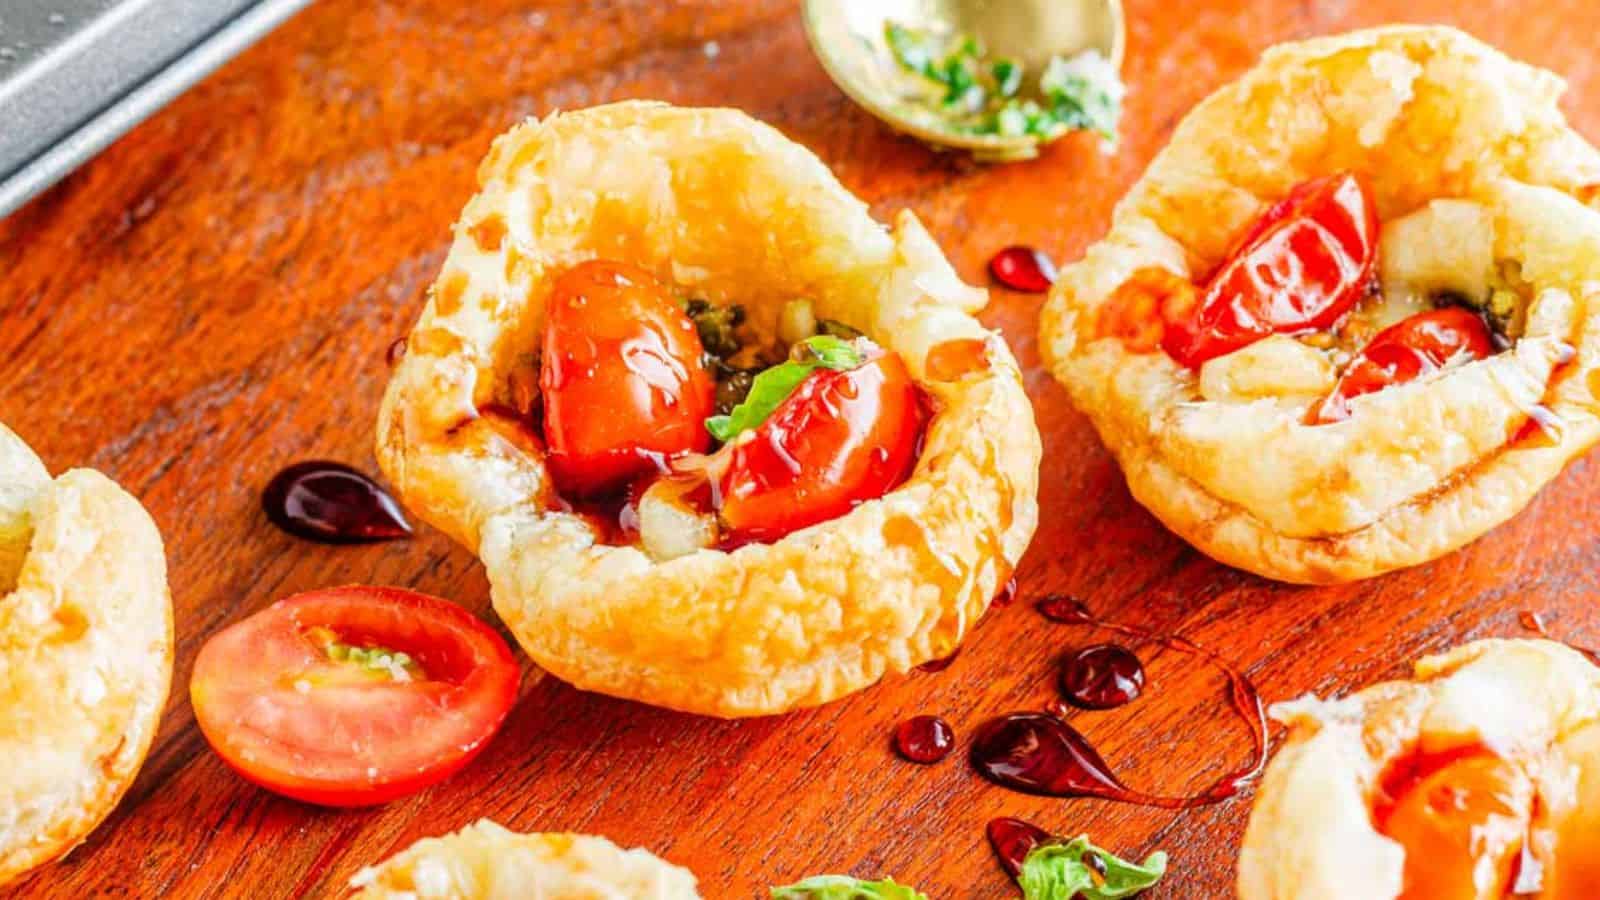 <p>Bite-size and seriously tasty, these Caprese Pesto Tarts are a go-to for any event. Plus, they’re so easy to handle while you’re chatting away. You’ll soon be known for these epic potluck recipes they’ll beg you for!<br><strong>Get the Recipe: </strong><a href="https://www.pocketfriendlyrecipes.com/caprese-pesto-tarts-recipe/?utm_source=msn&utm_medium=page&utm_campaign=msn">Caprese Pesto Tarts</a></p>